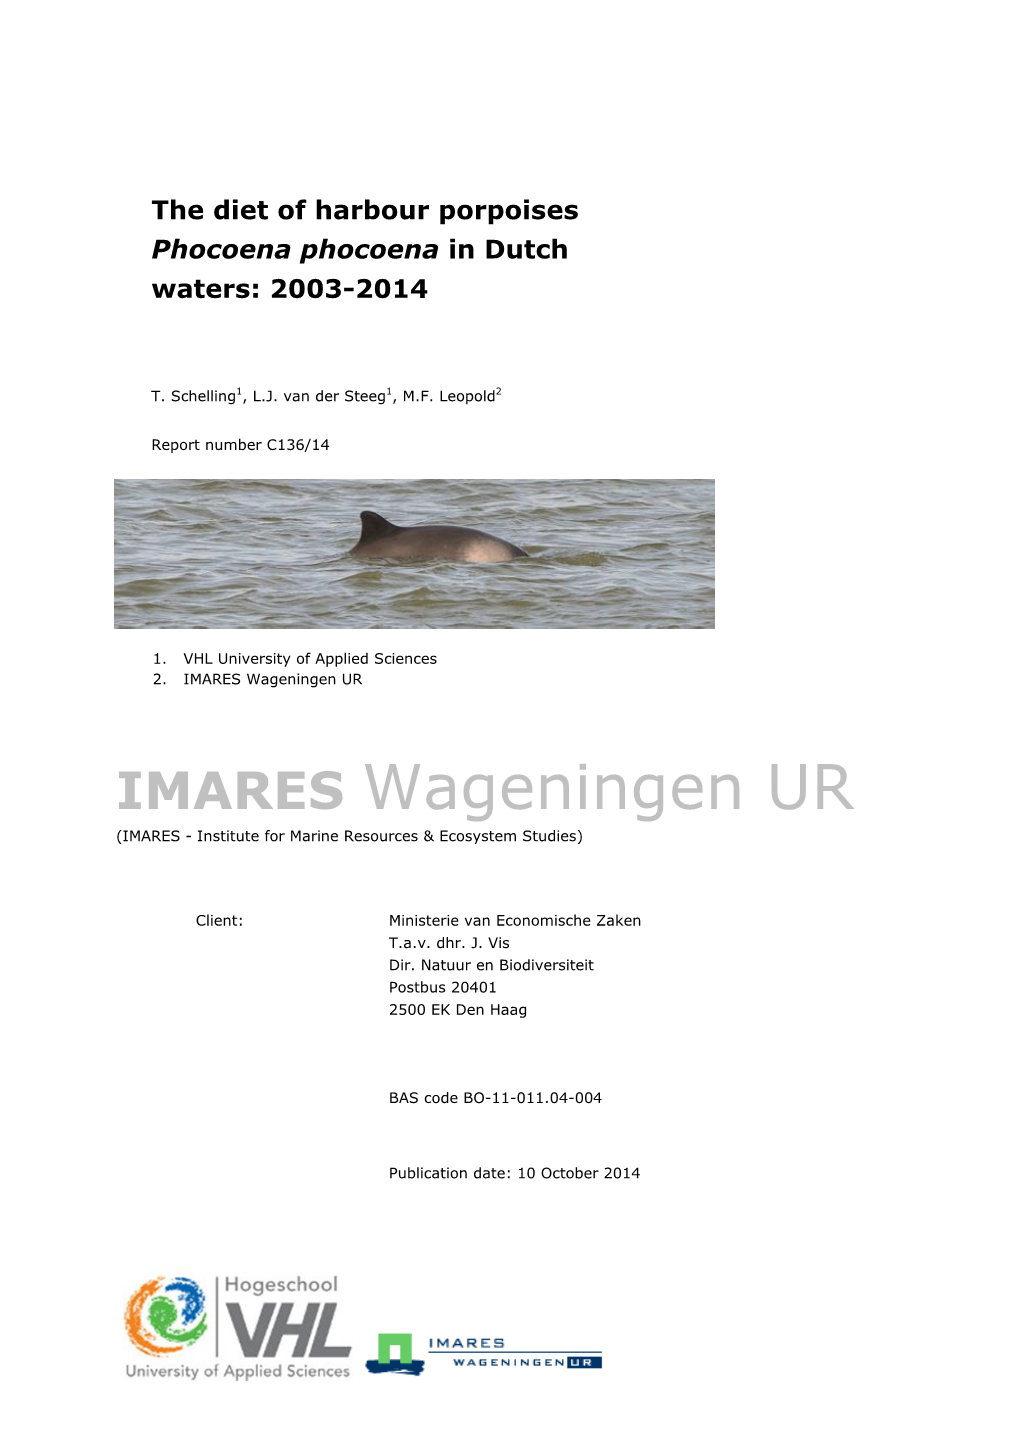 The Diet of Harbour Porpoises in Dutch Waters Showed That Diets Were in General Rather Similar Along Different Sections of the Dutch Coastline